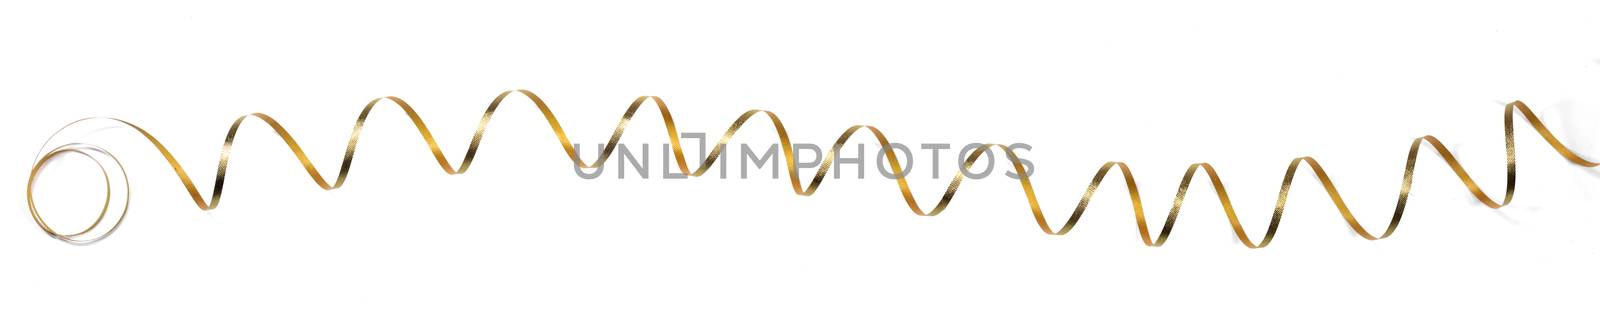 Golden curly ribbon decoration isolated on white background